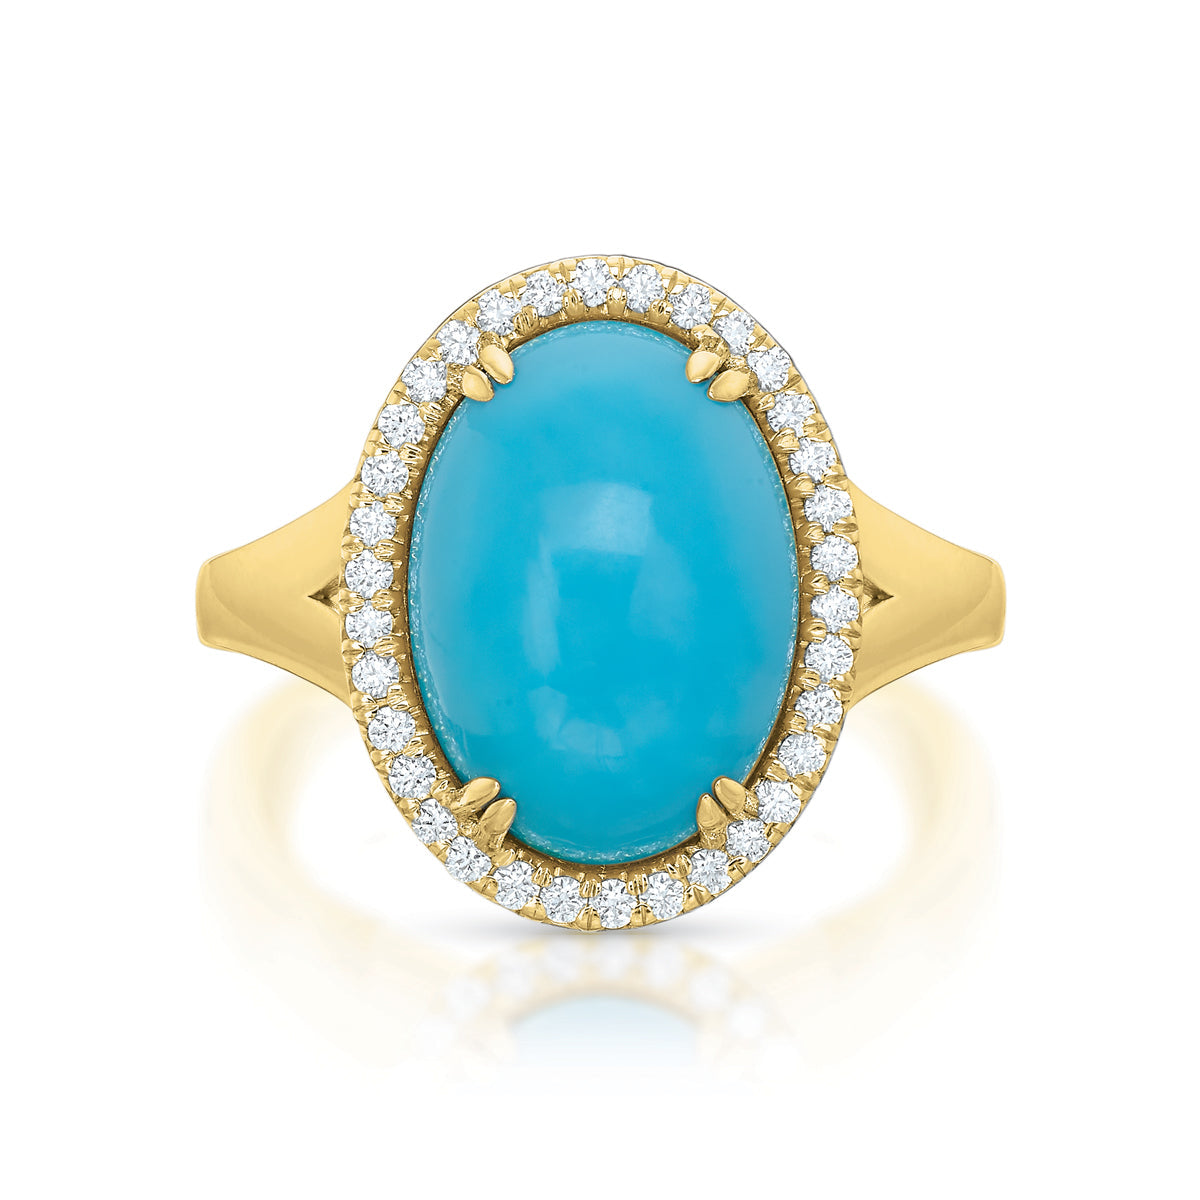 Taylor Sleeping Beauty Turquoise Ring